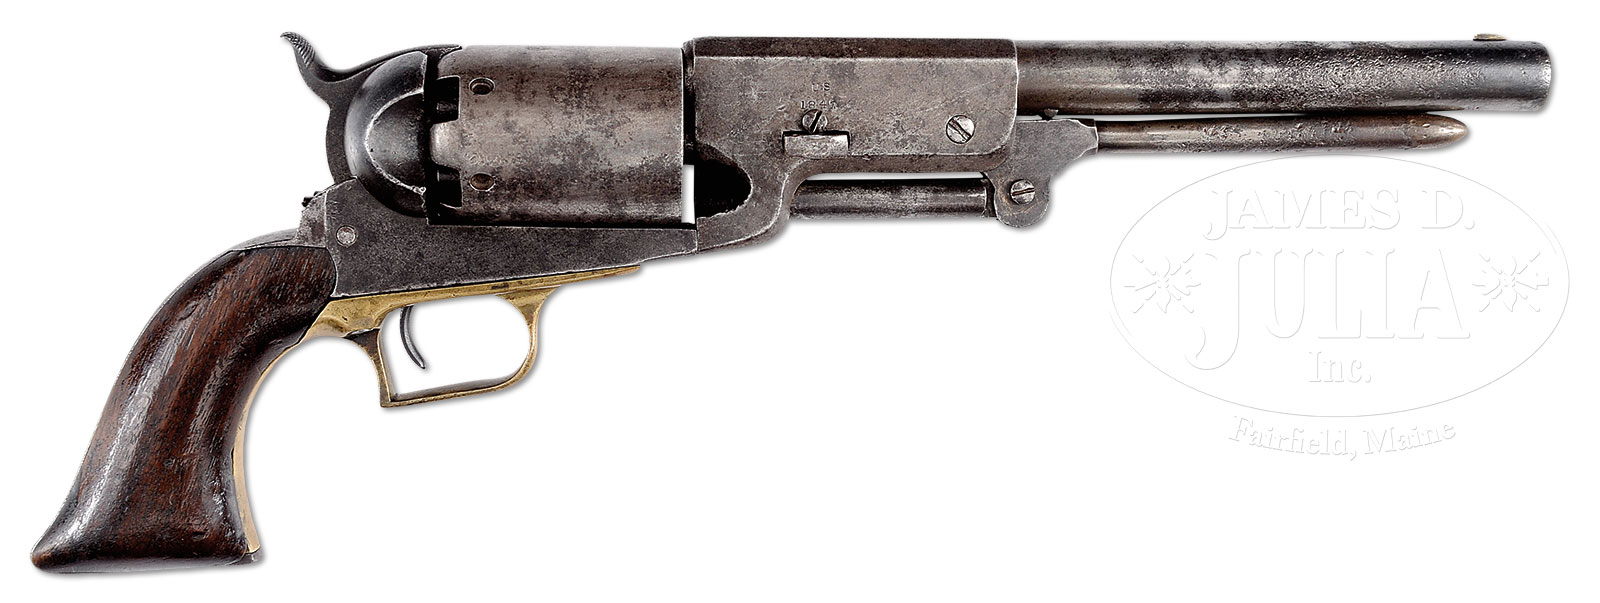 VERY RARE COLT WALKER PERCUSSION REVOLVER AUTHENTICATED IN THE PARADE OF WALKERS.